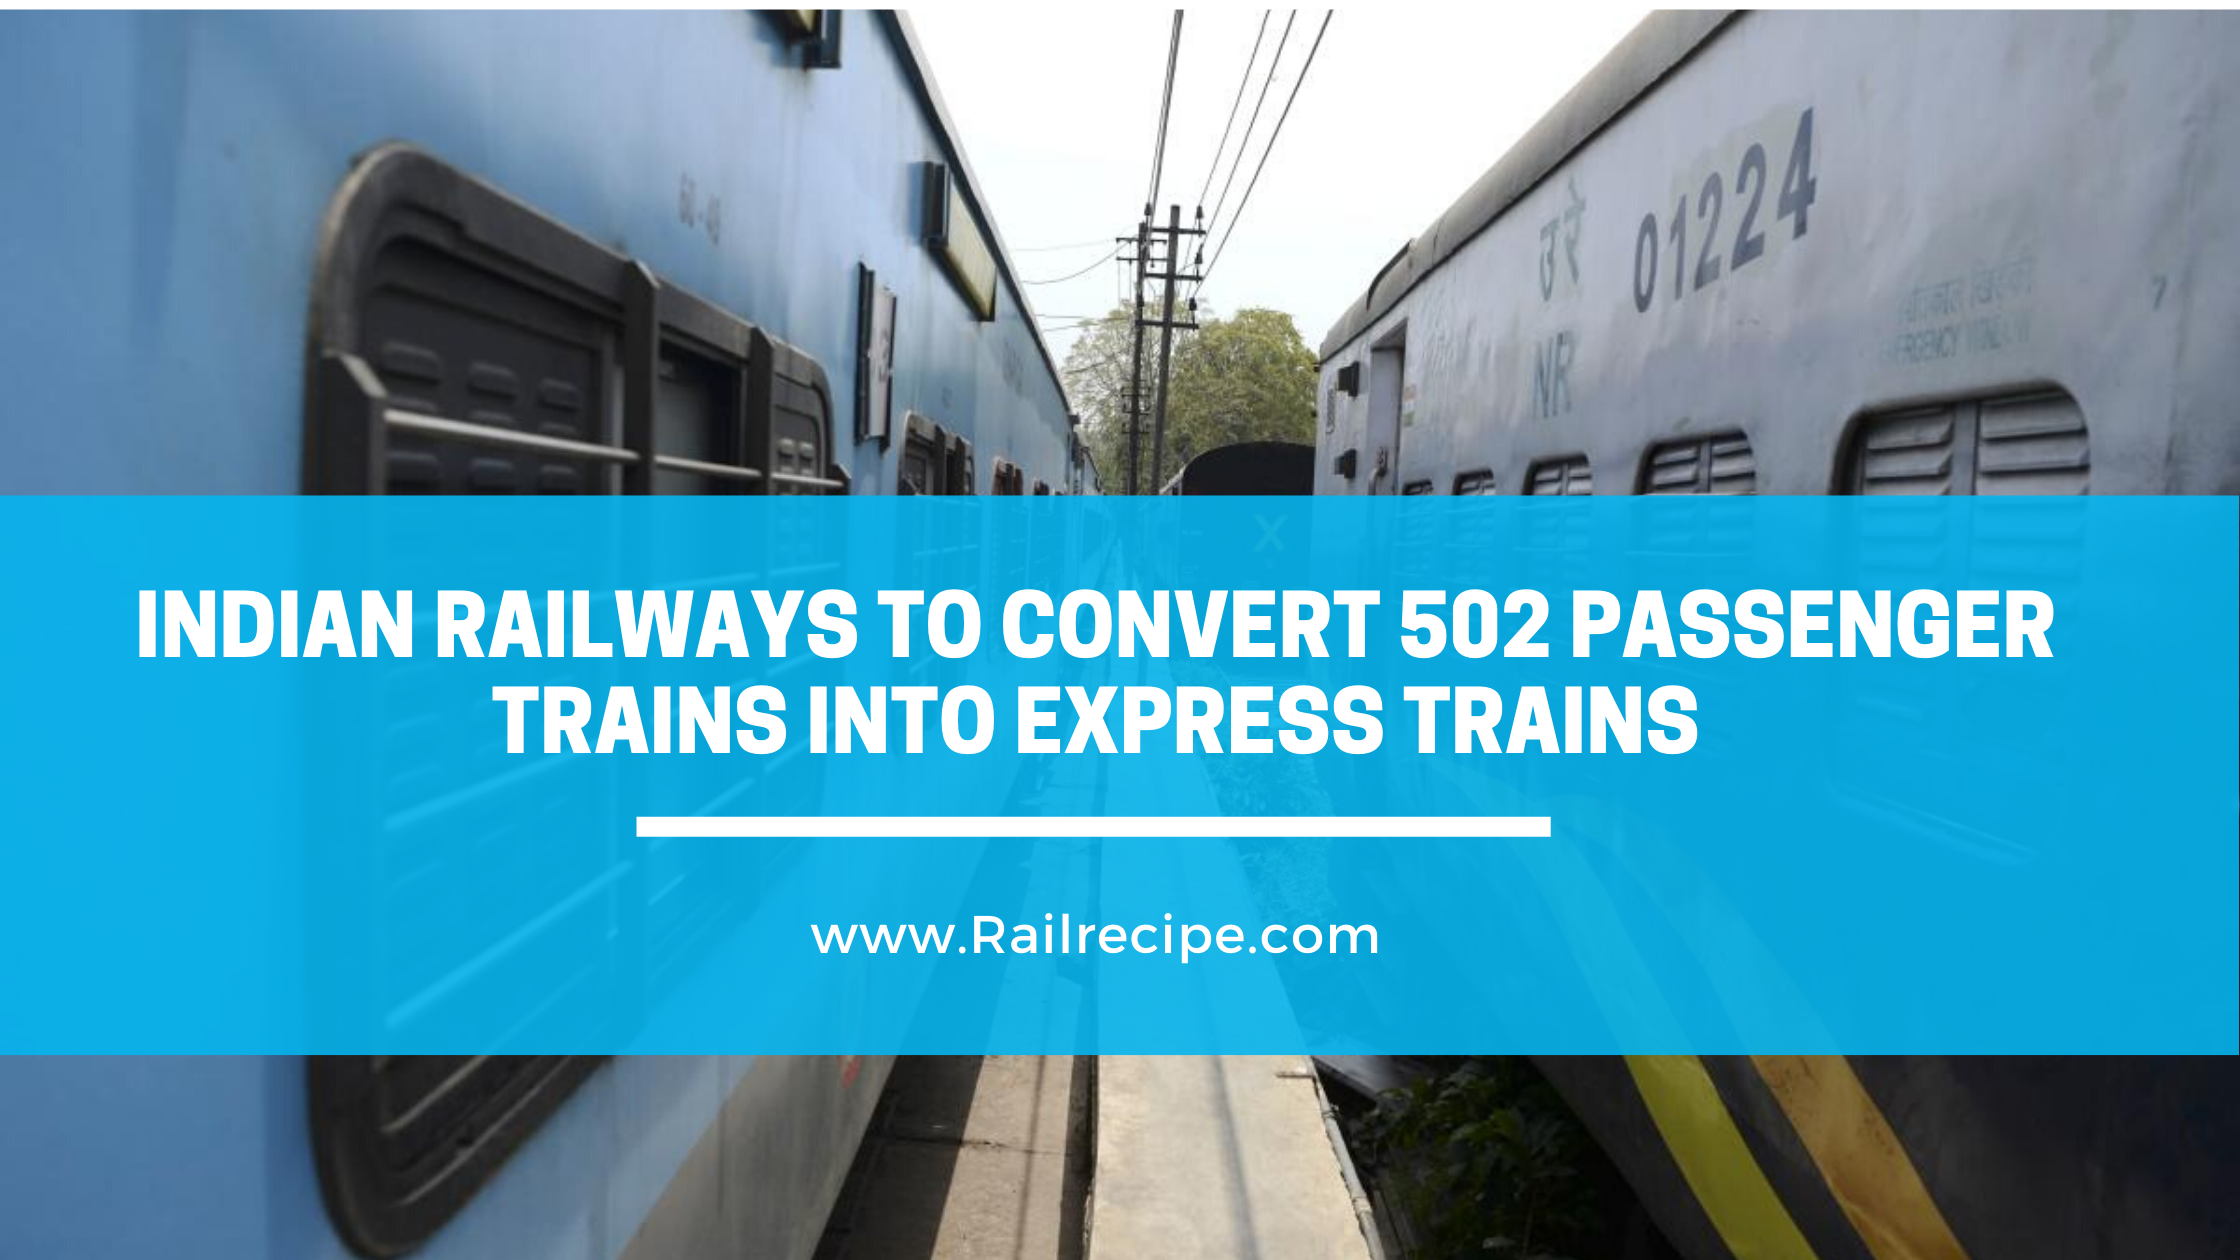 Indian Railways to Convert 502 Passenger Trains into Express Trains